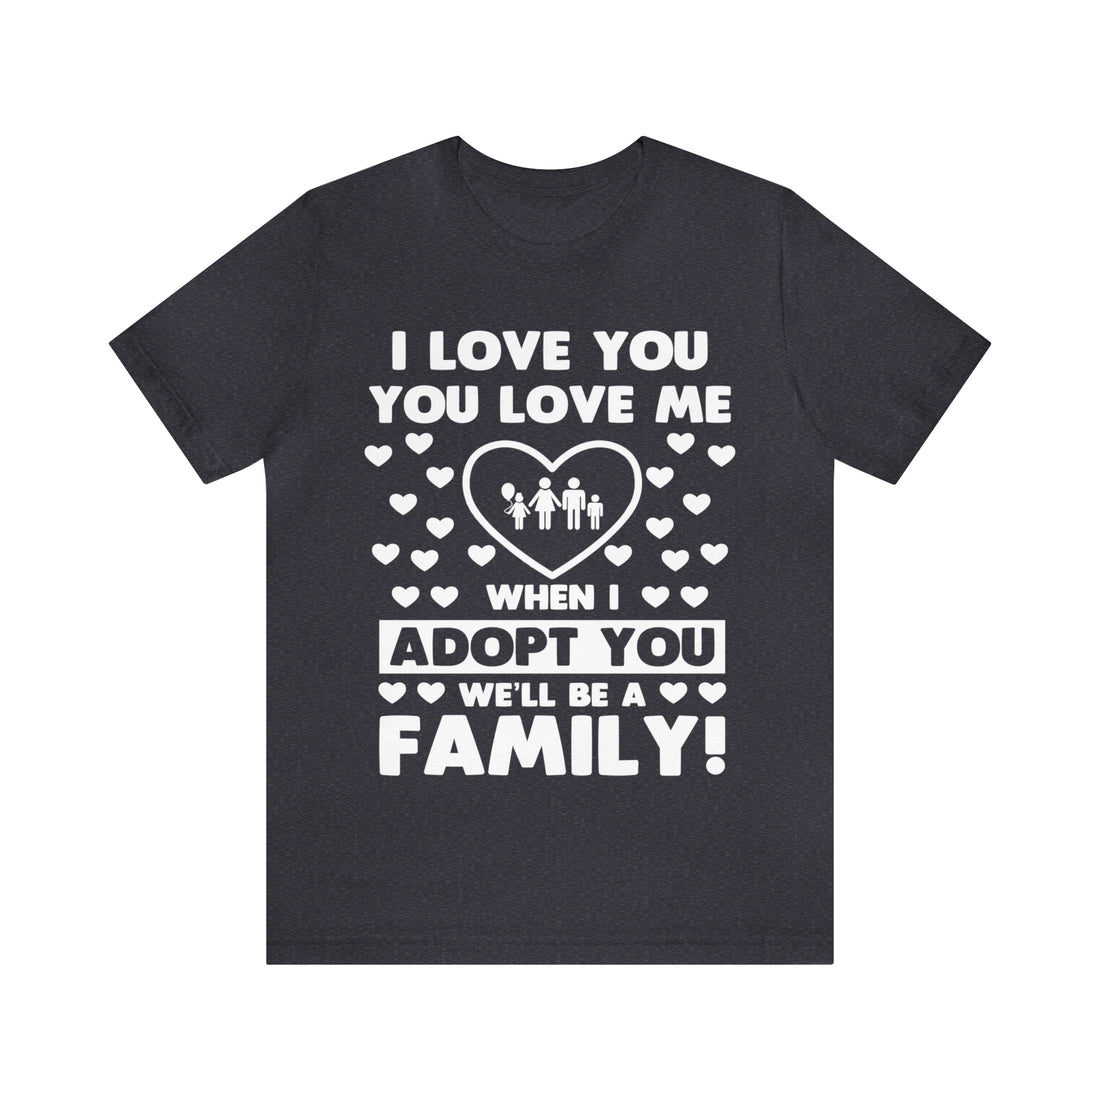 When I Adopt you we will be a Family - Unisex Jersey Short Sleeve Tee